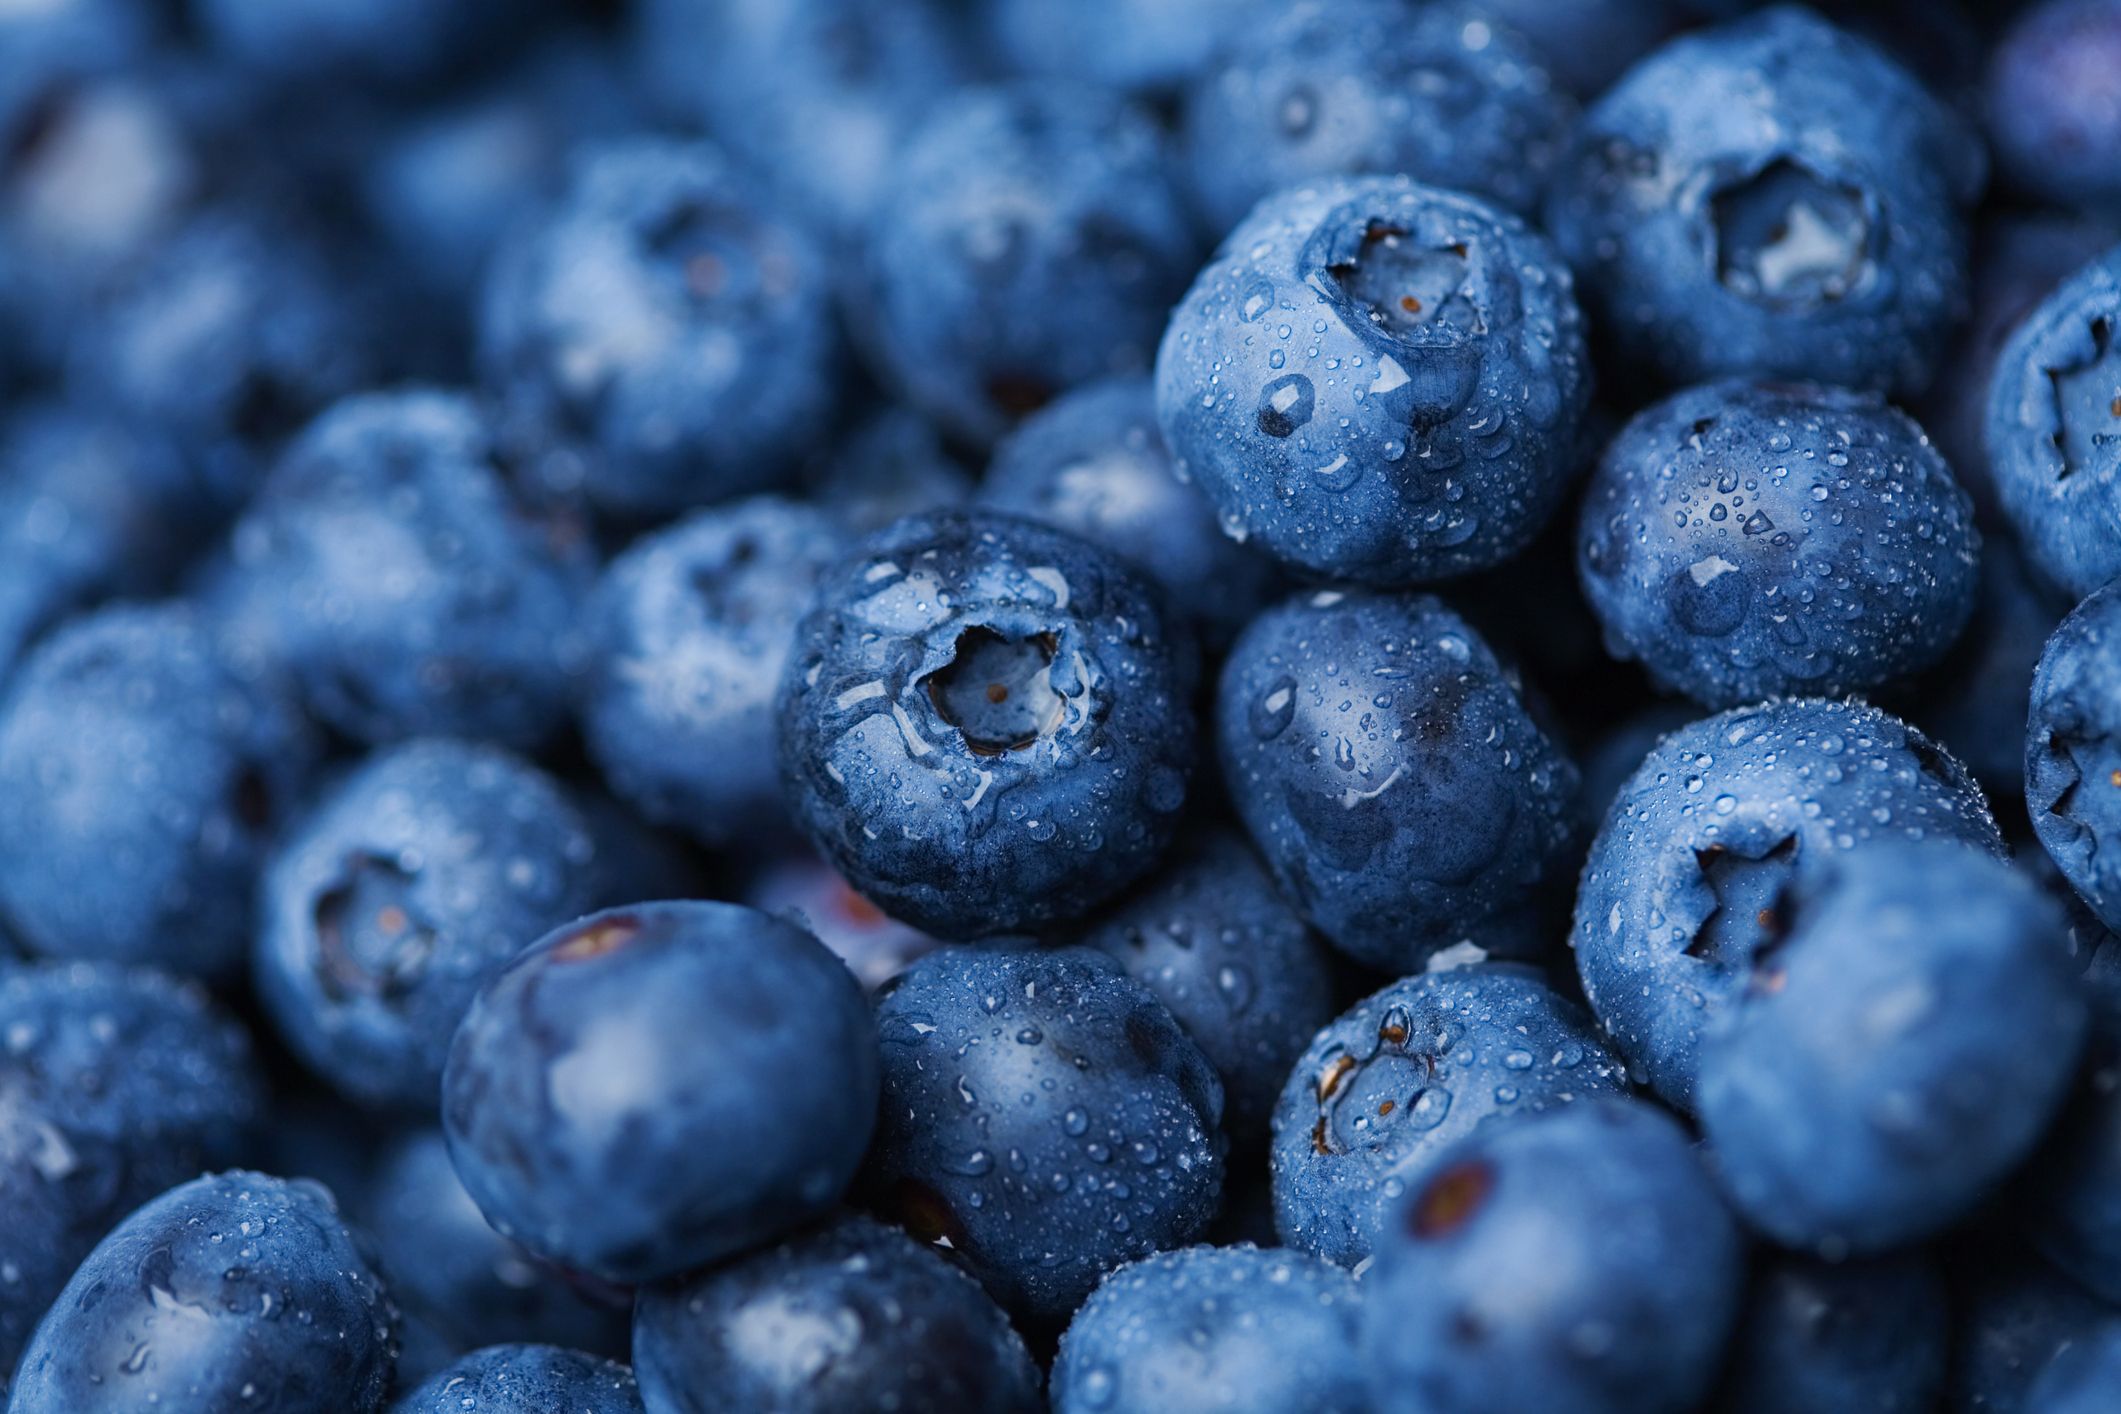 Blueberries Nutrition - Why You Should Eat More Blueberries